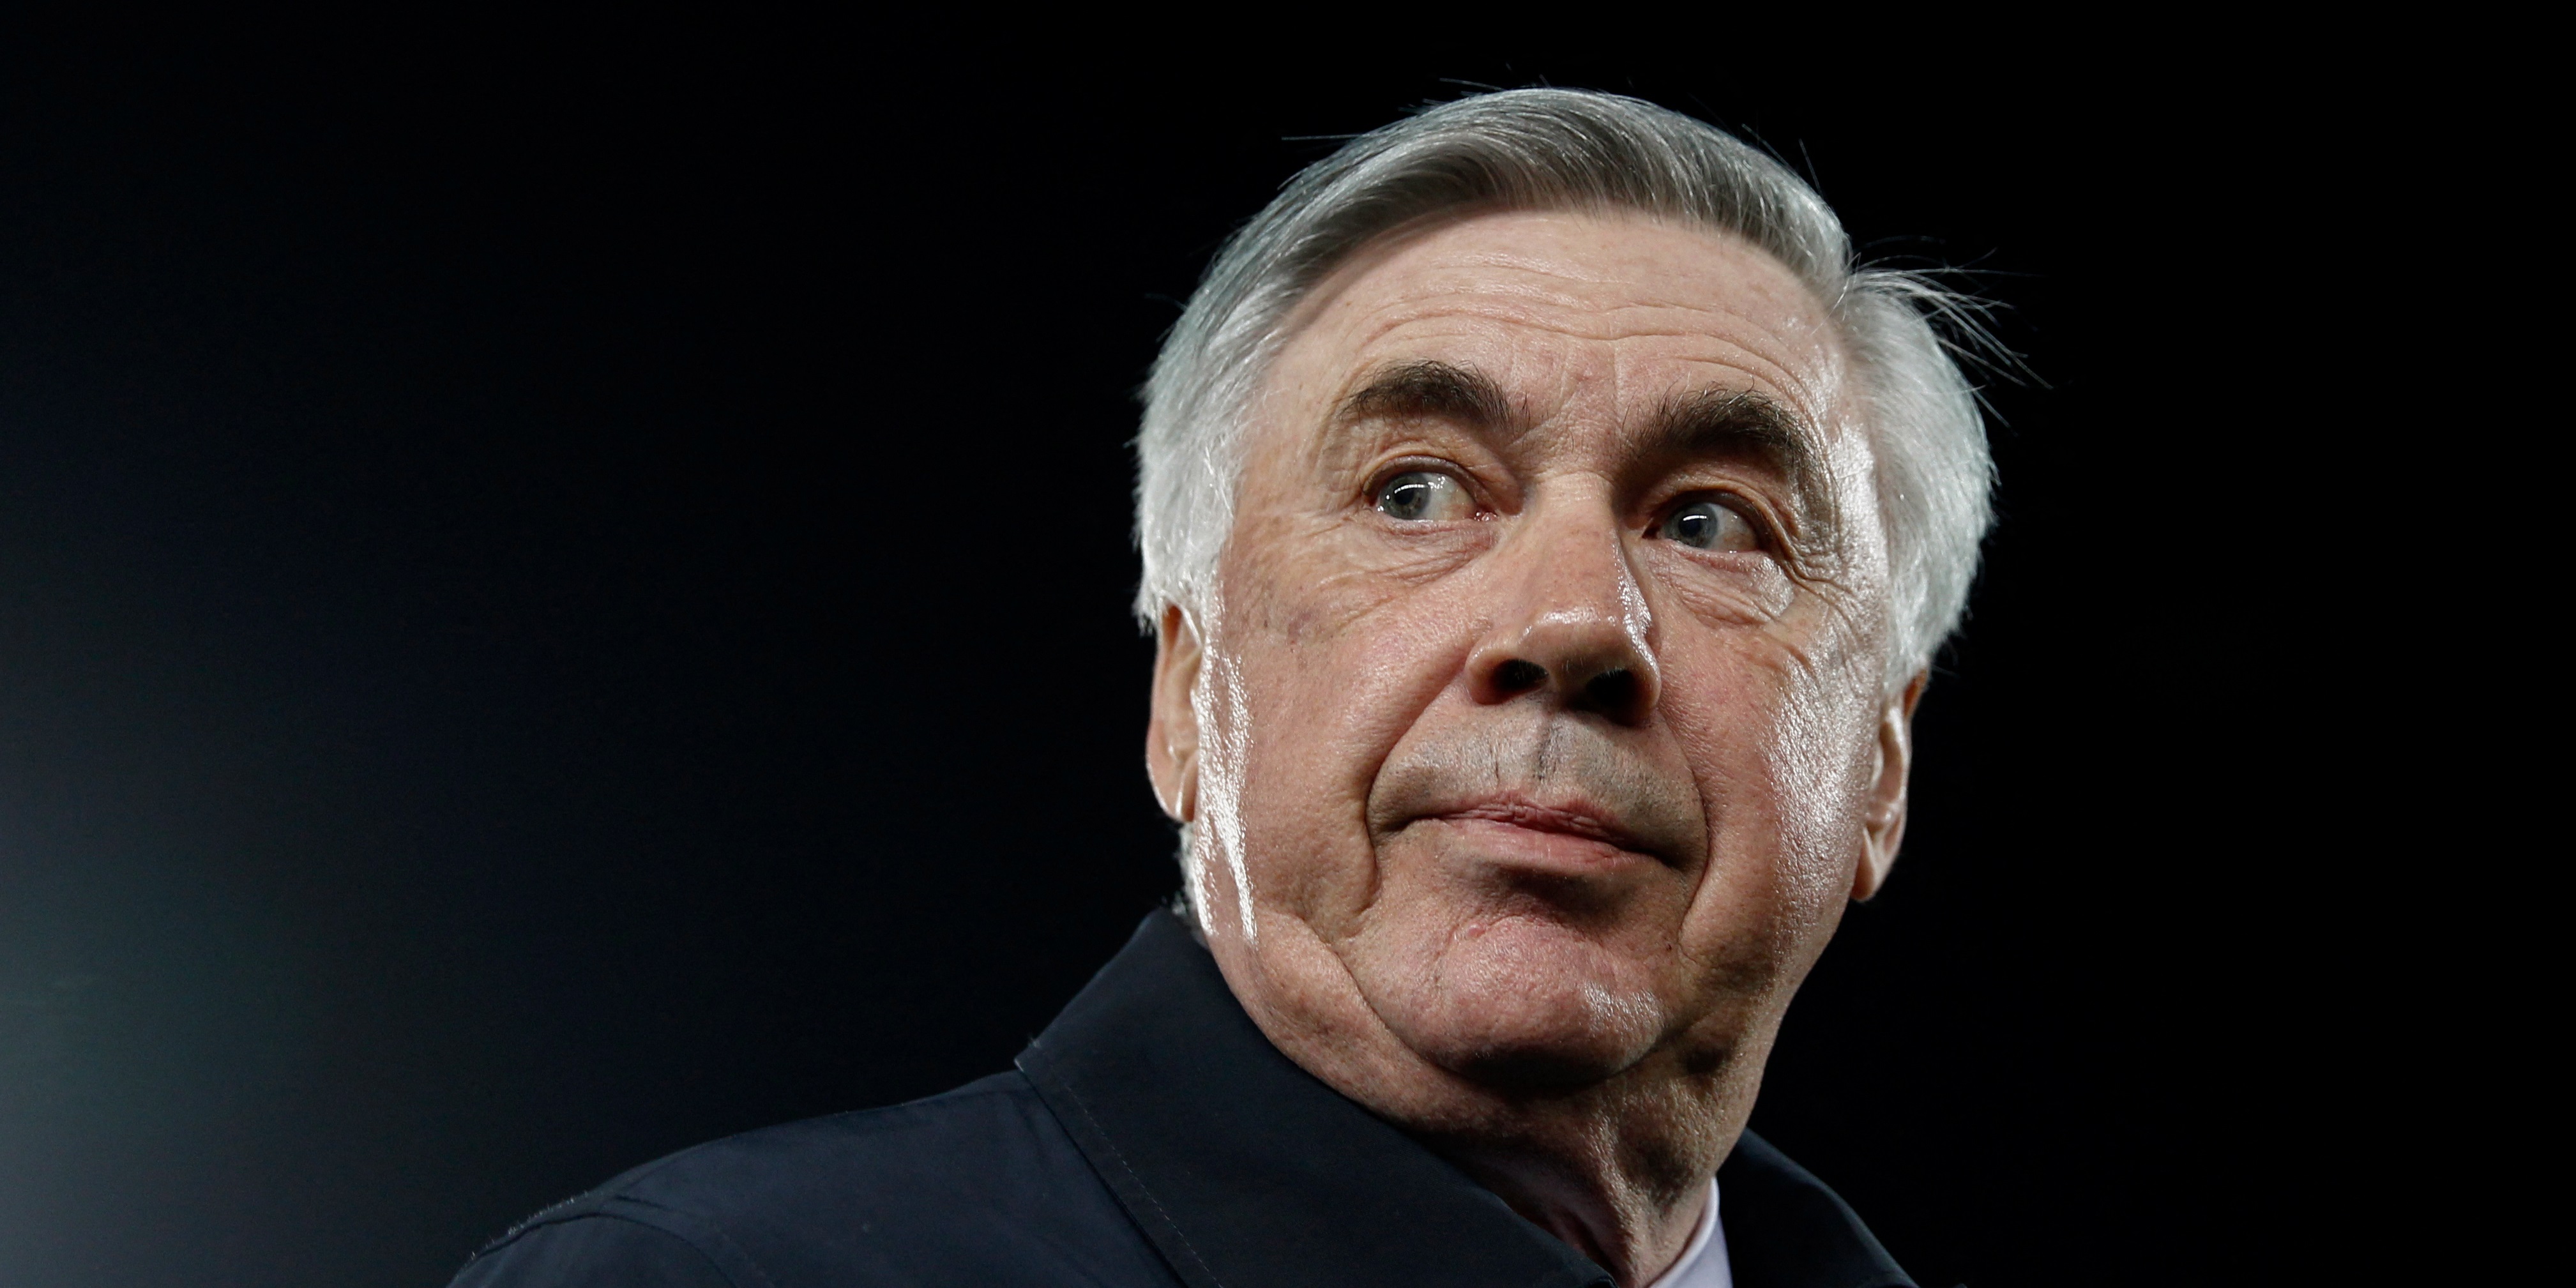 ‘As we did against City’ – Carlo Ancelotti reveals Real Madrid’s tactics for when they face Liverpool in the Champions League final